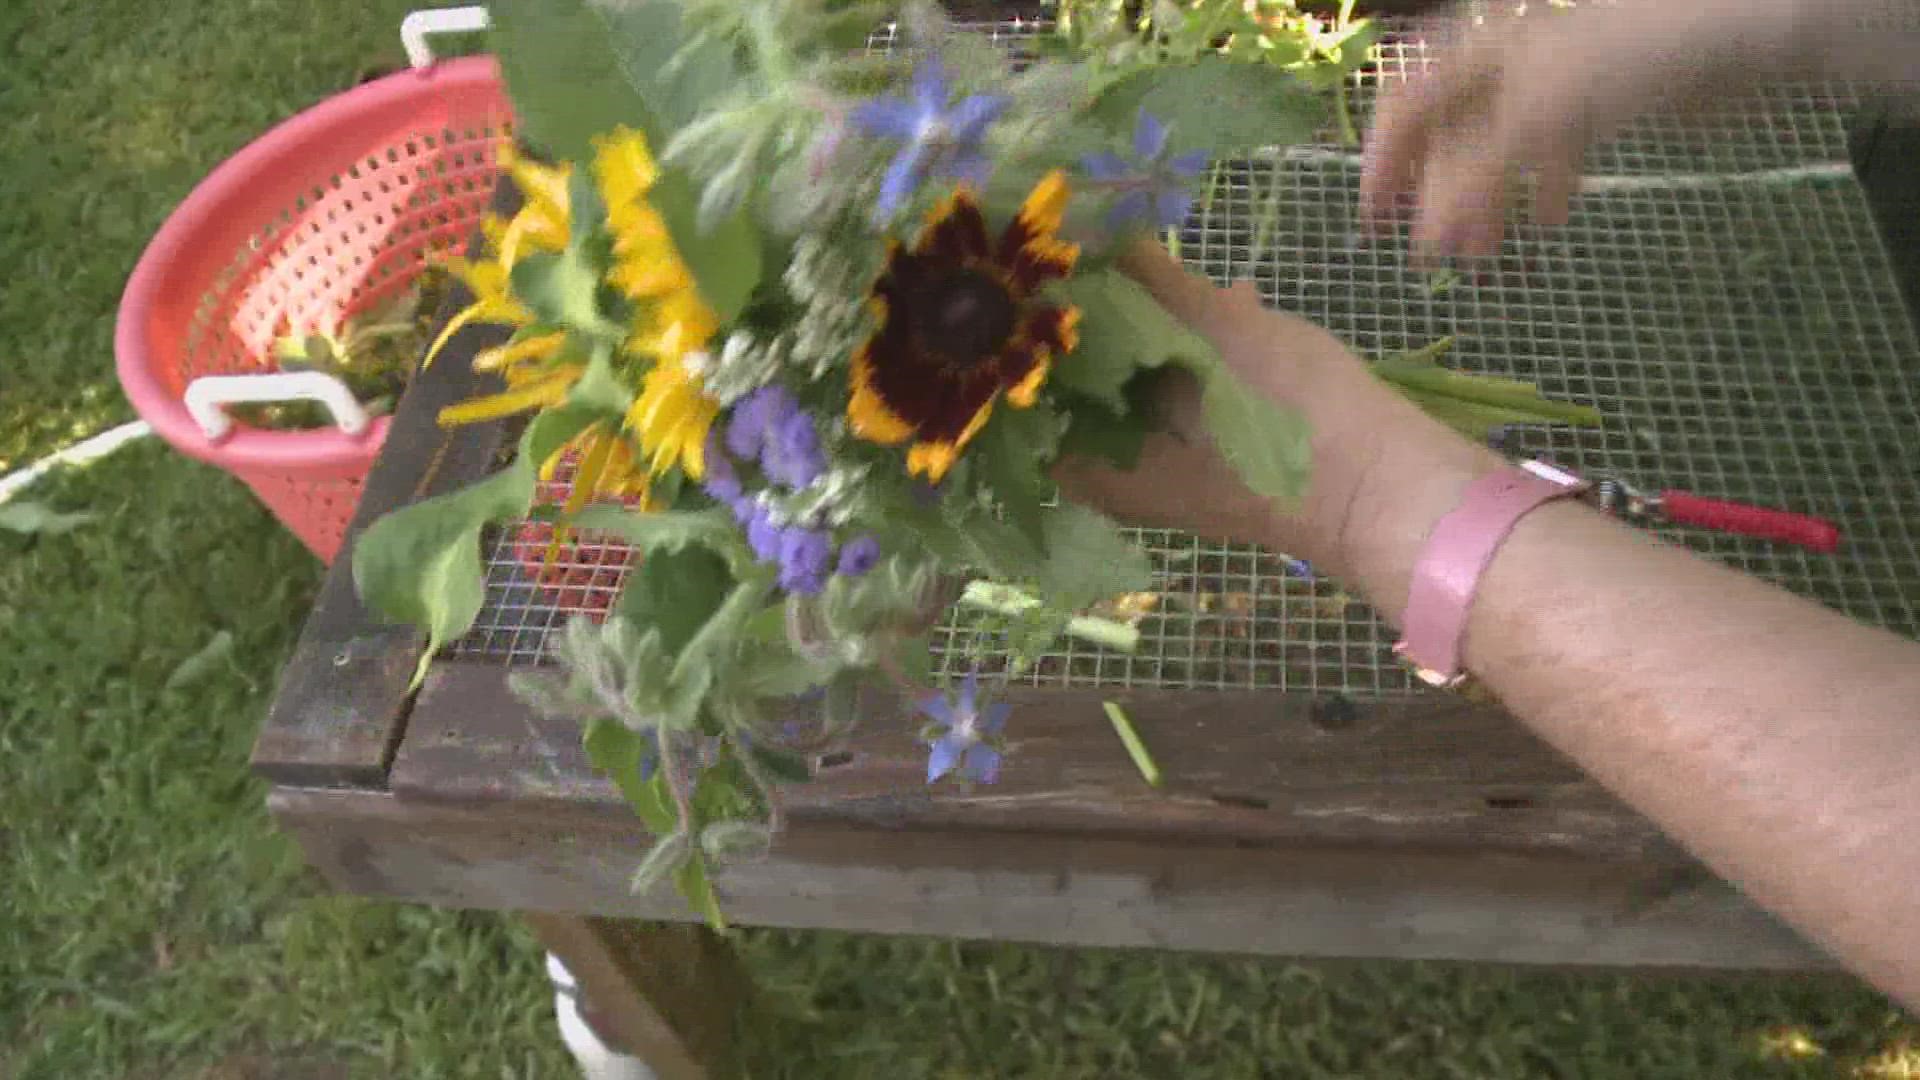 Erica Berman owns and runs Veggies to Table in Newcastle. She is spreading hope and joy to community members by giving them flower bouquets from her one-acre farm.